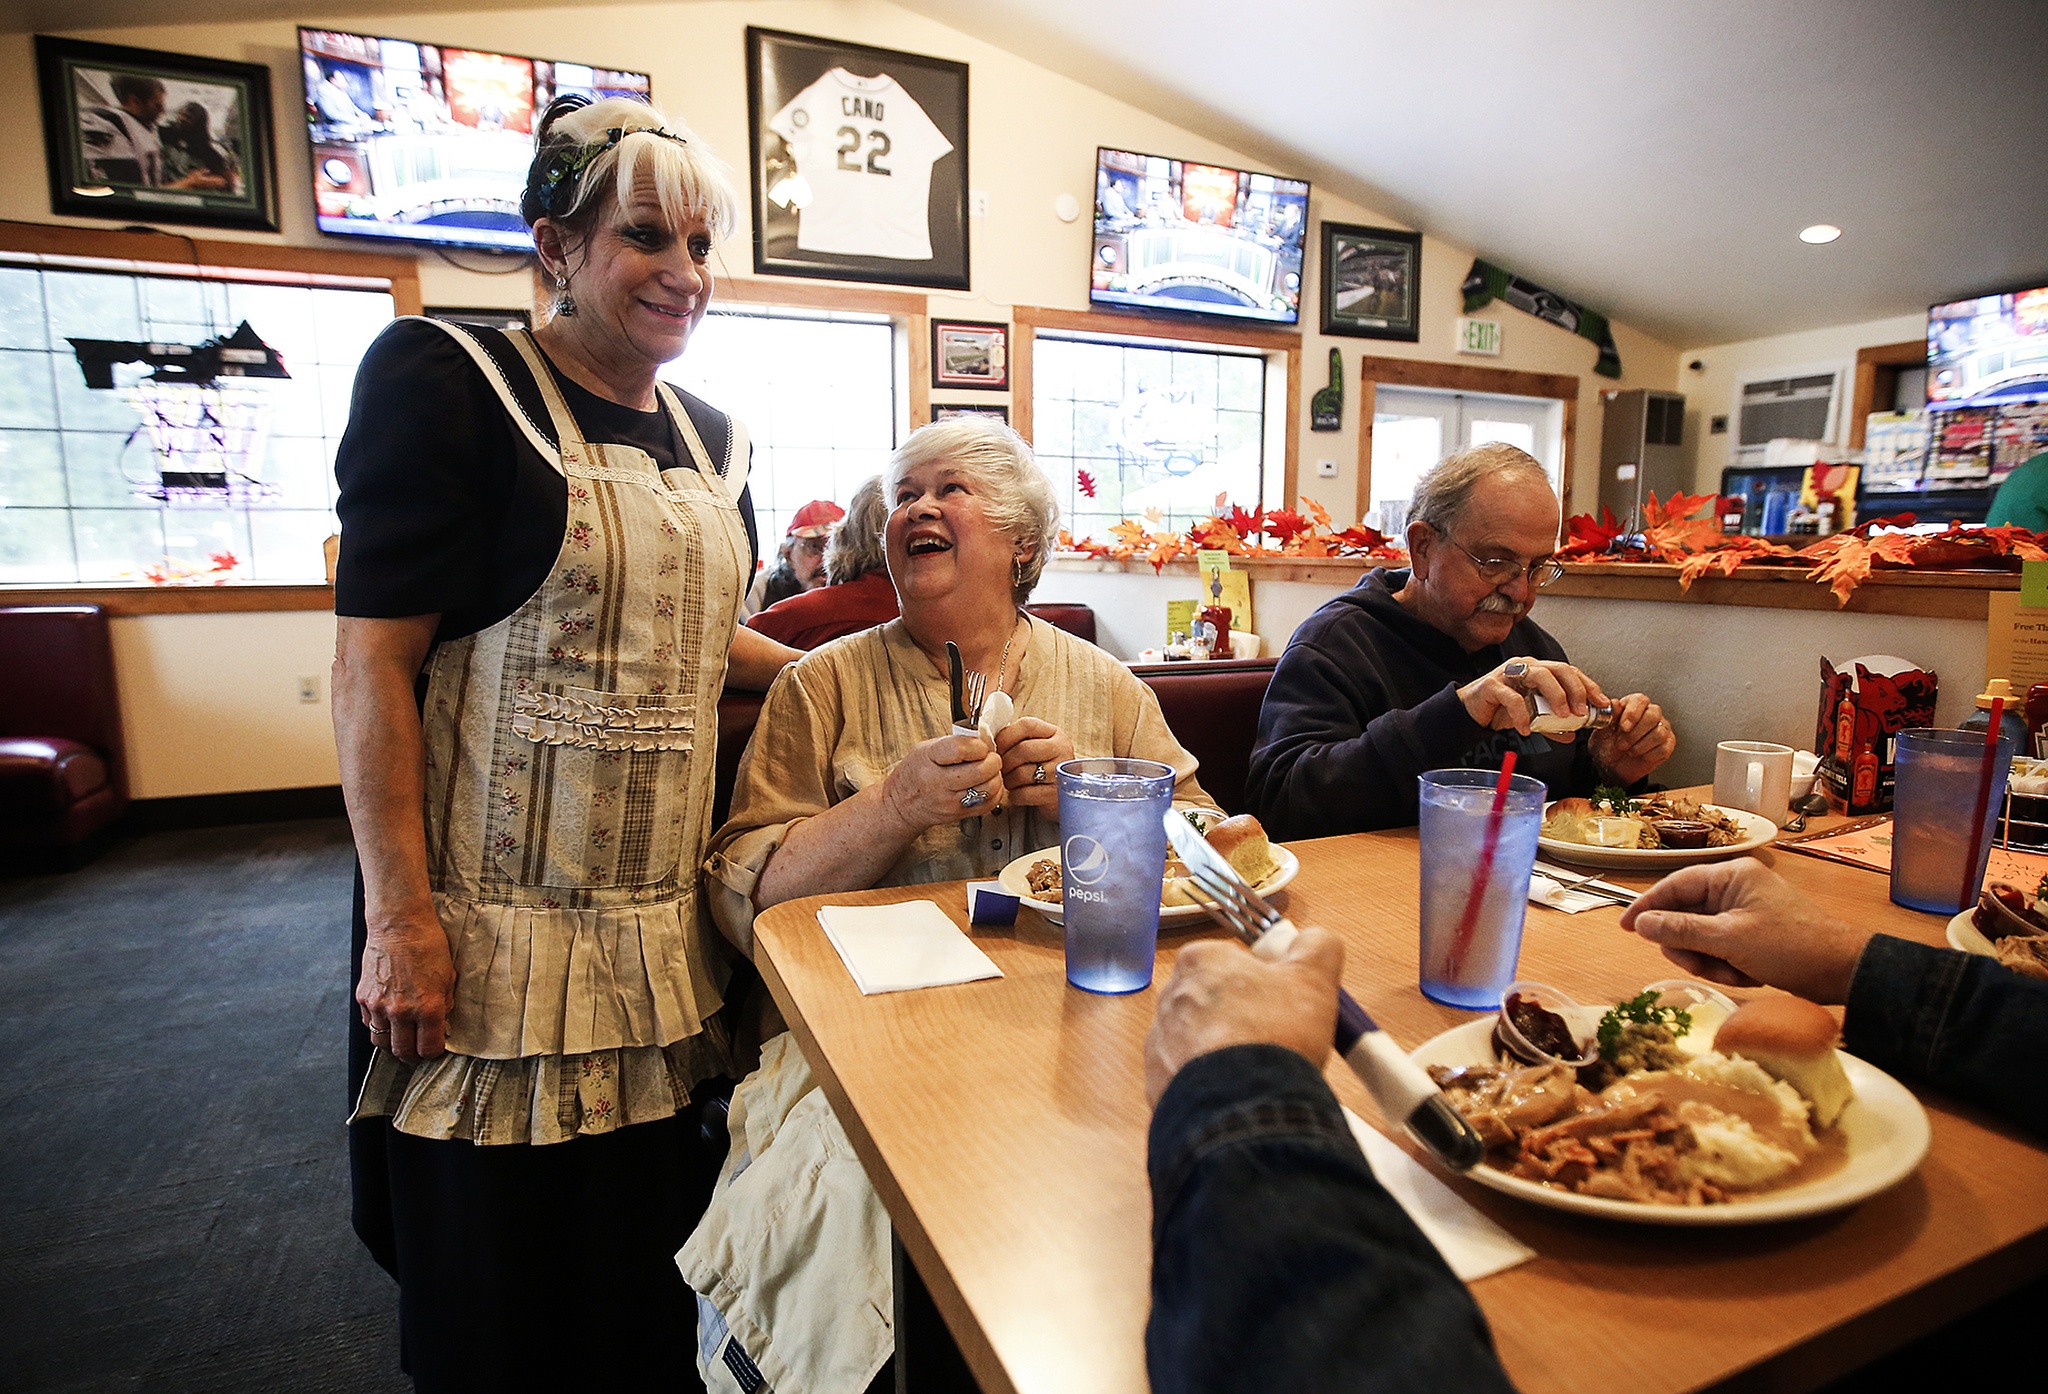 Cheri Fenstermaker (left) chats with Joan (center) and Marvin Kastning after serving them their Thanksgiving meals at The Hawks Nest restaurant in Darrington on Thursday, Nov. 24. The Hawks Nest opened their doors and served the usual Thanksgiving fanfare in a gesture to give back to the community that has welcomed them since first opening in April. (Ian Terry / The Herald)